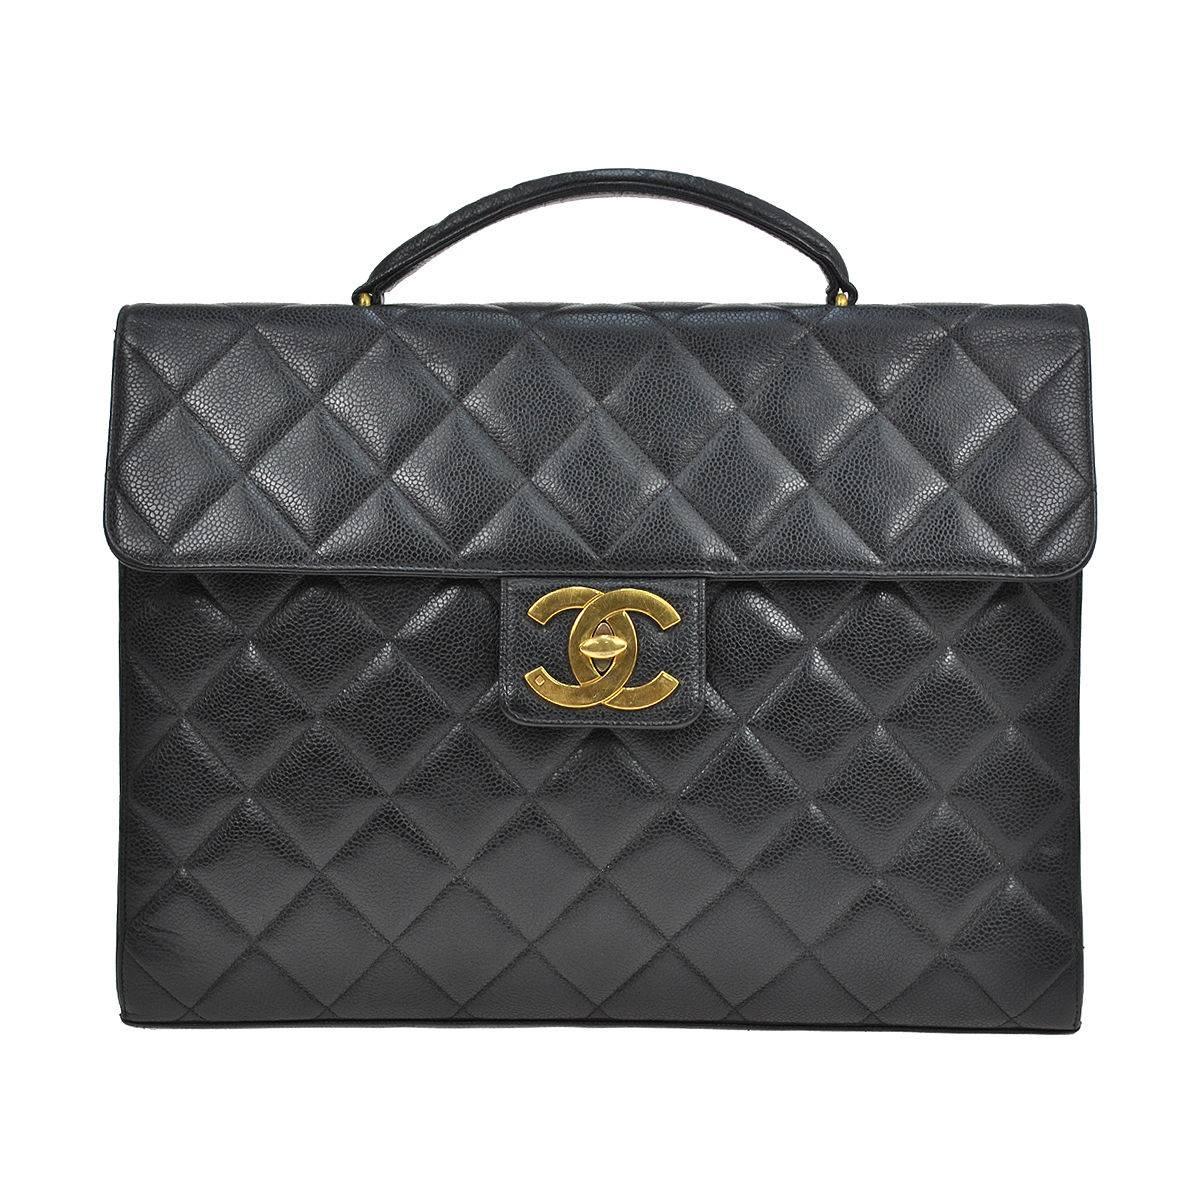 Chanel Caviar Leather Carryall Business Top Handle Travel Brief Briefcase Bag